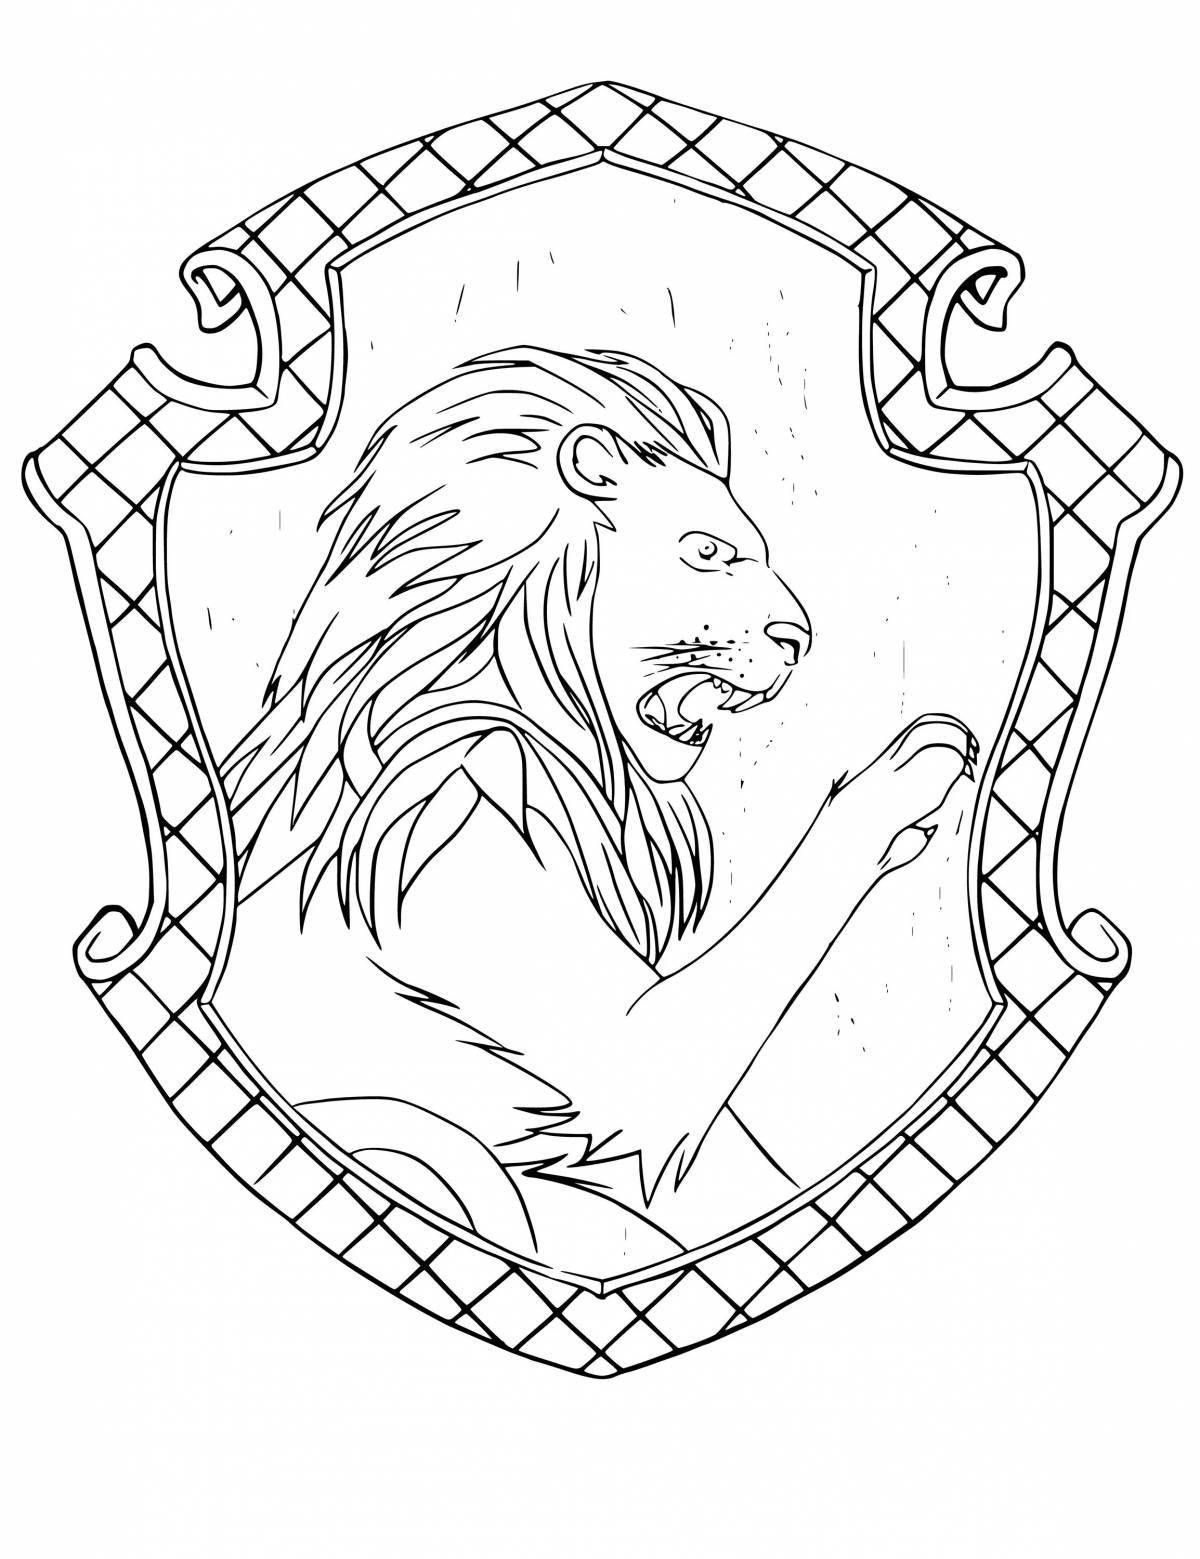 Hogwarts coat of arms coloring page